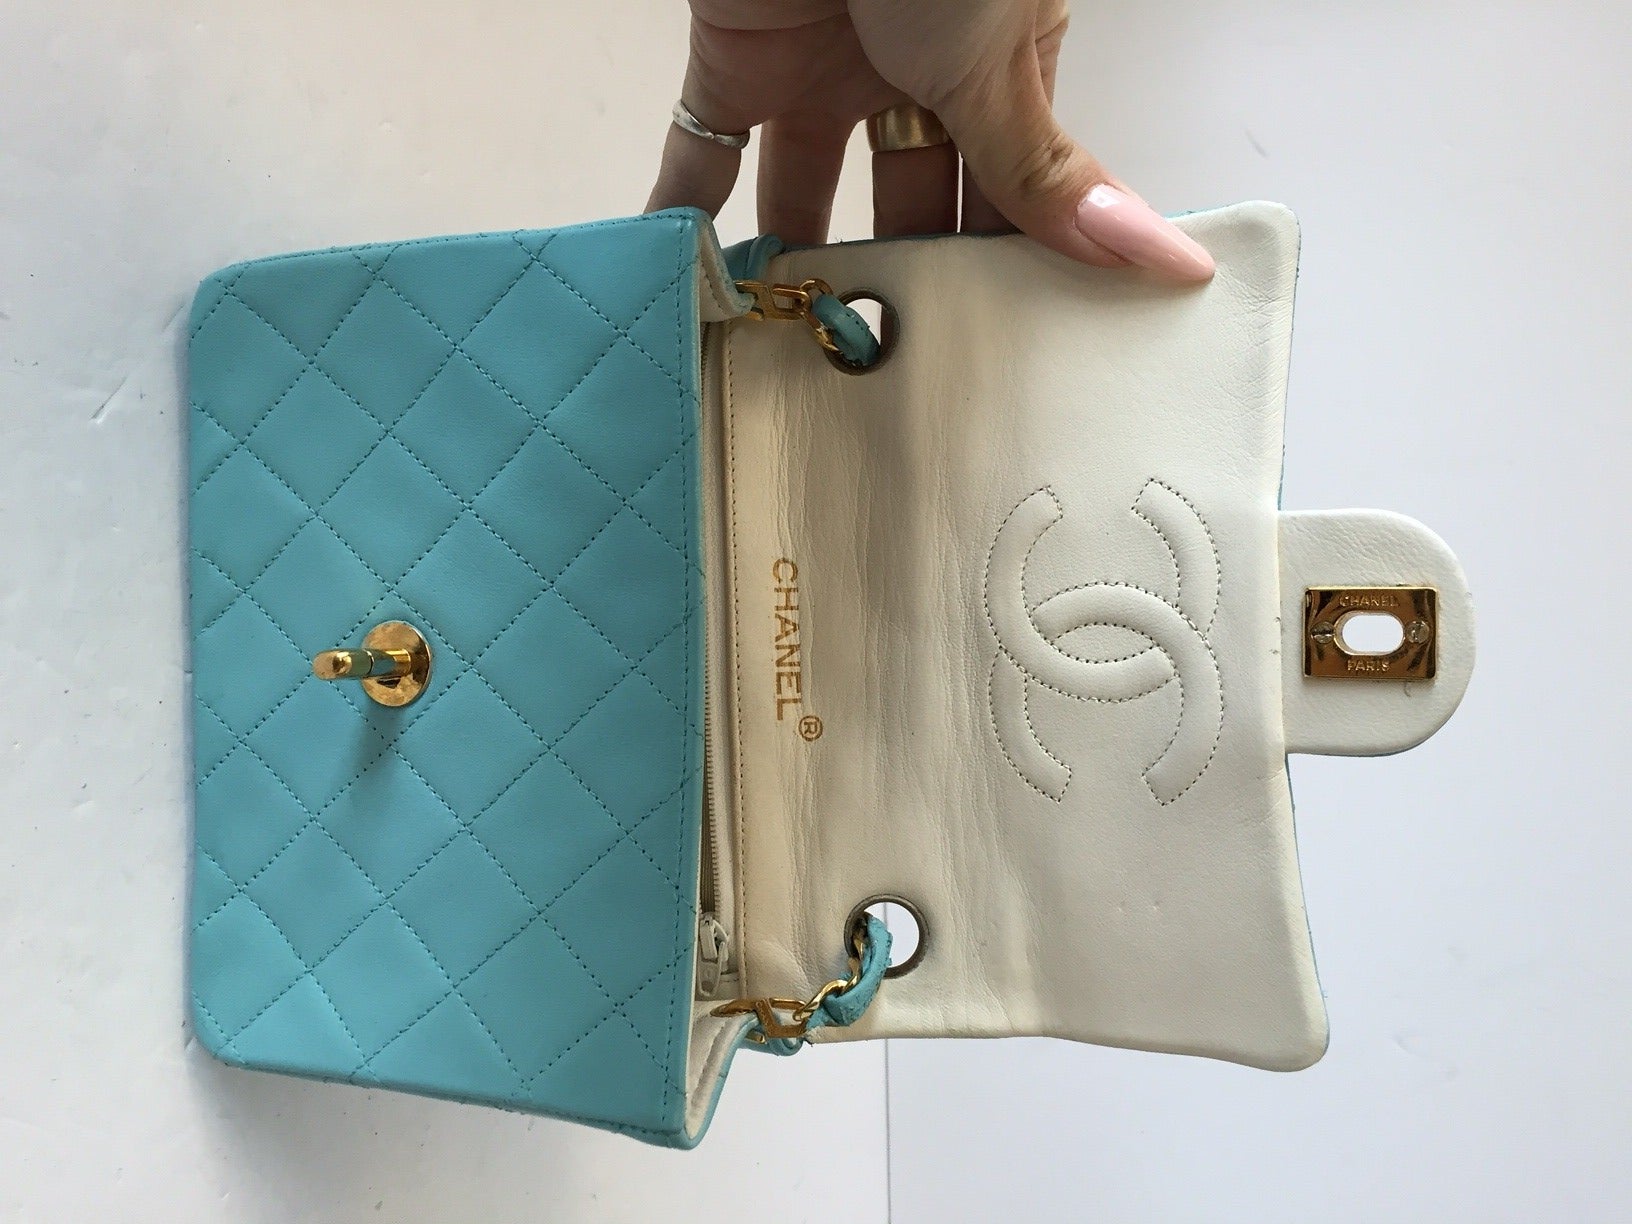 Chanel Tiffany Blue Vintage Quilted Lambskin Leather Classic Mini Flap Bag In Excellent Condition For Sale In Westmount, Quebec